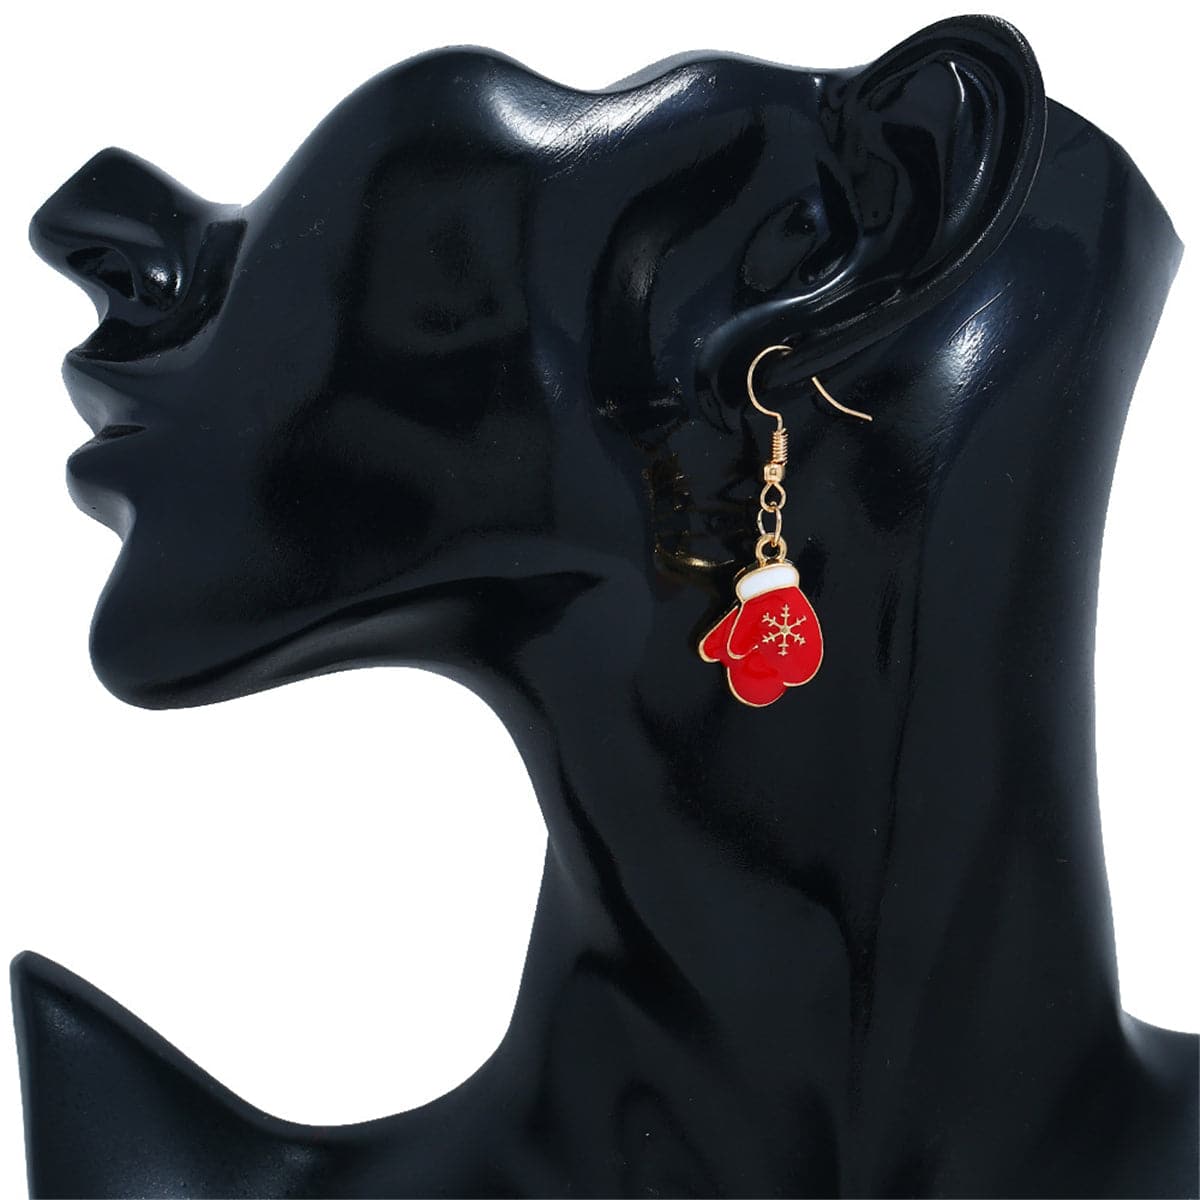 Red & 18K Gold-Plated Pair Of Mittens Drop Earrings